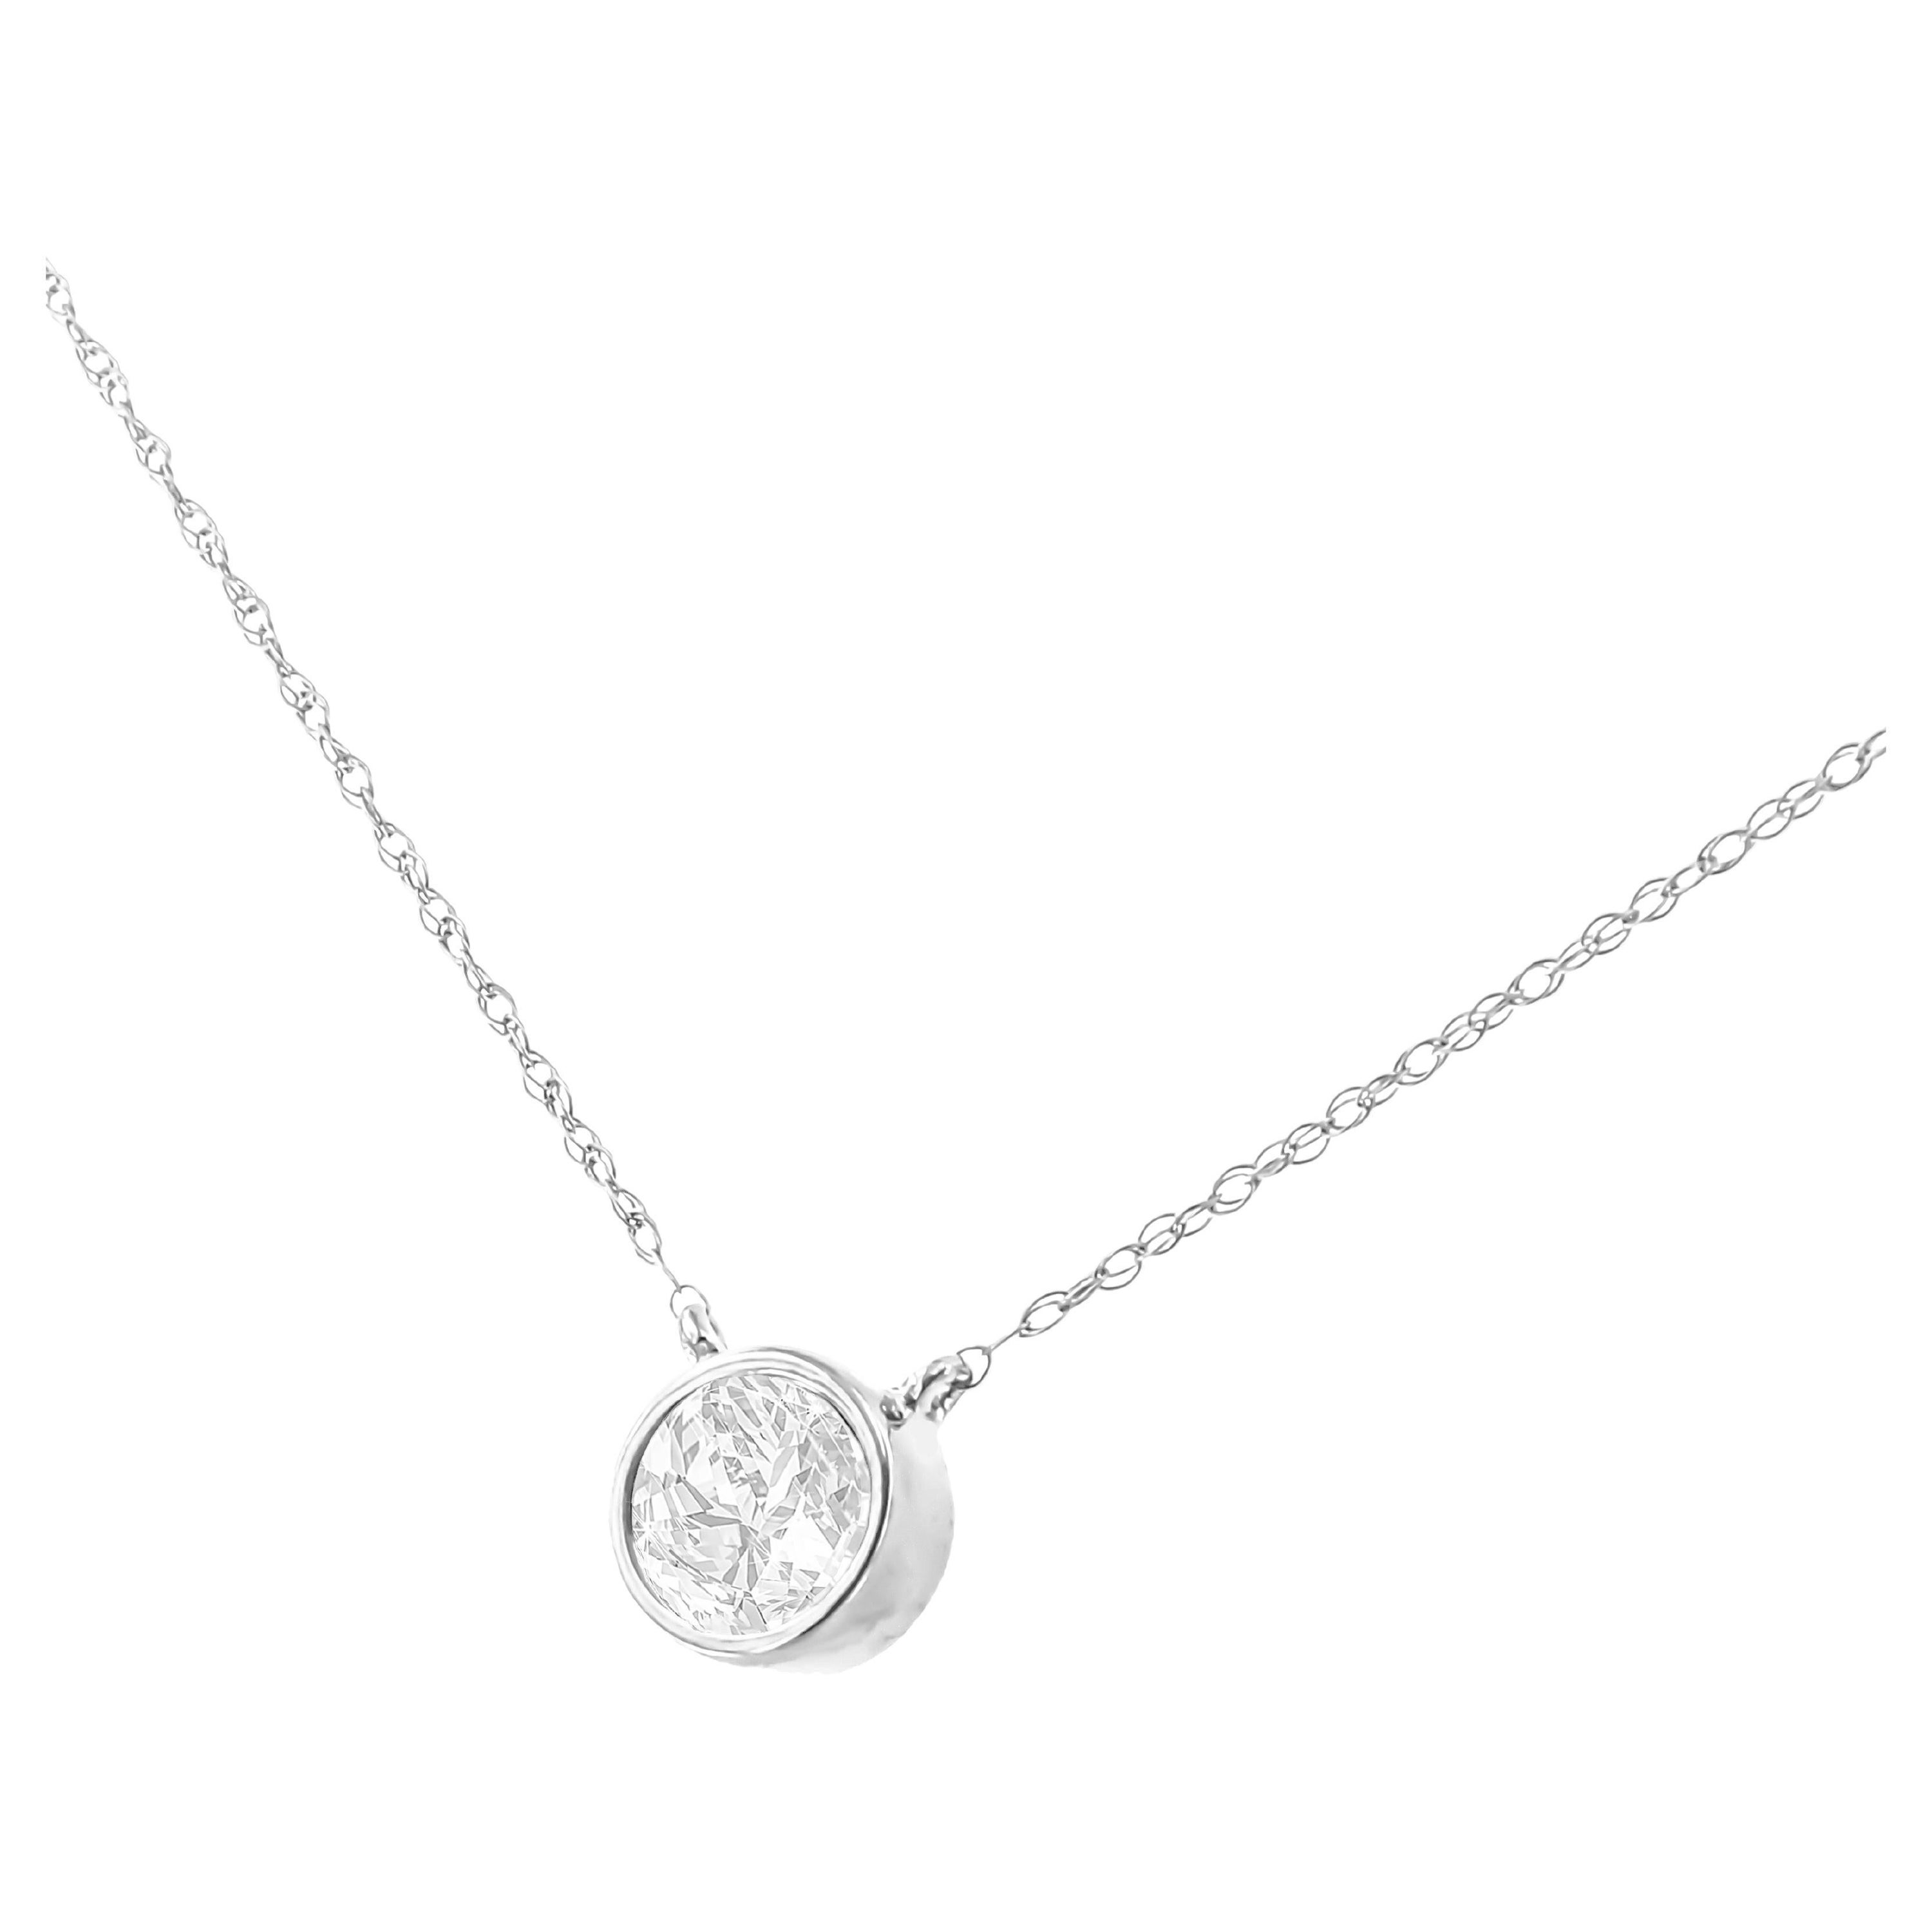 AGS Certified 10K White Gold 1/5 Carat Diamond Adjustable Pendant Necklace For Sale